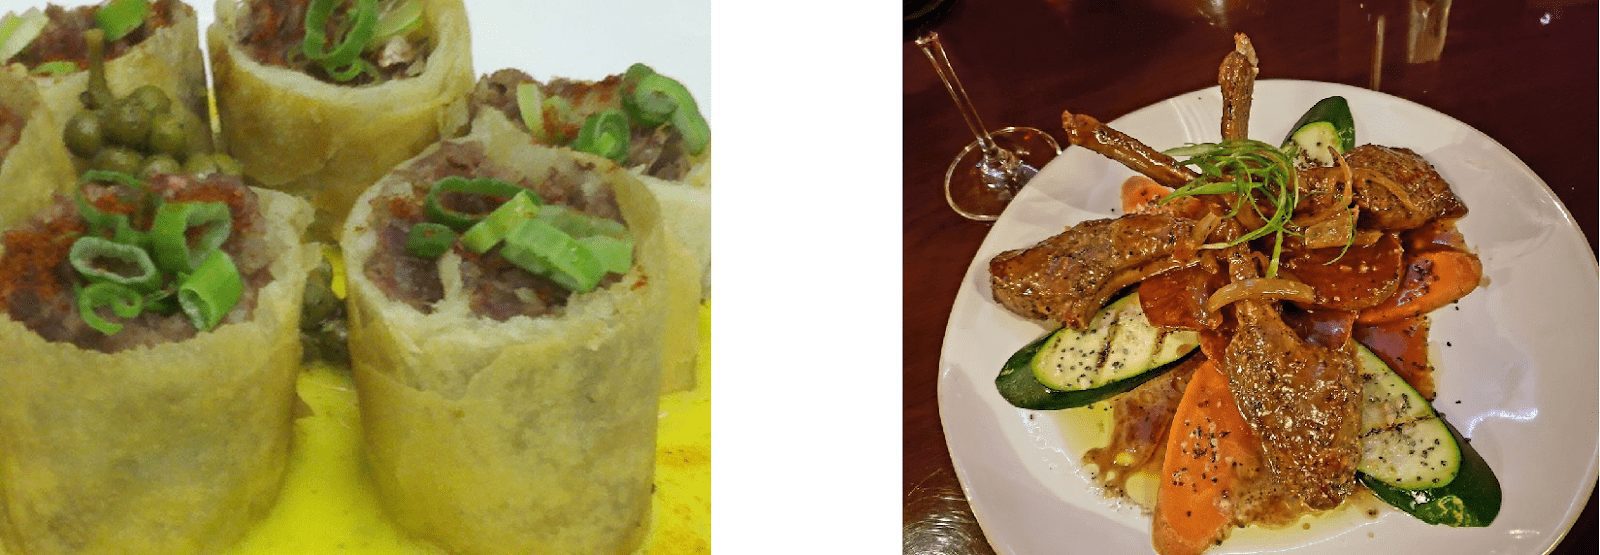 Brand Photo Comparison Of Two Food Dishes From Same Restaurant To Demonstrate Importance Of Quality Photos